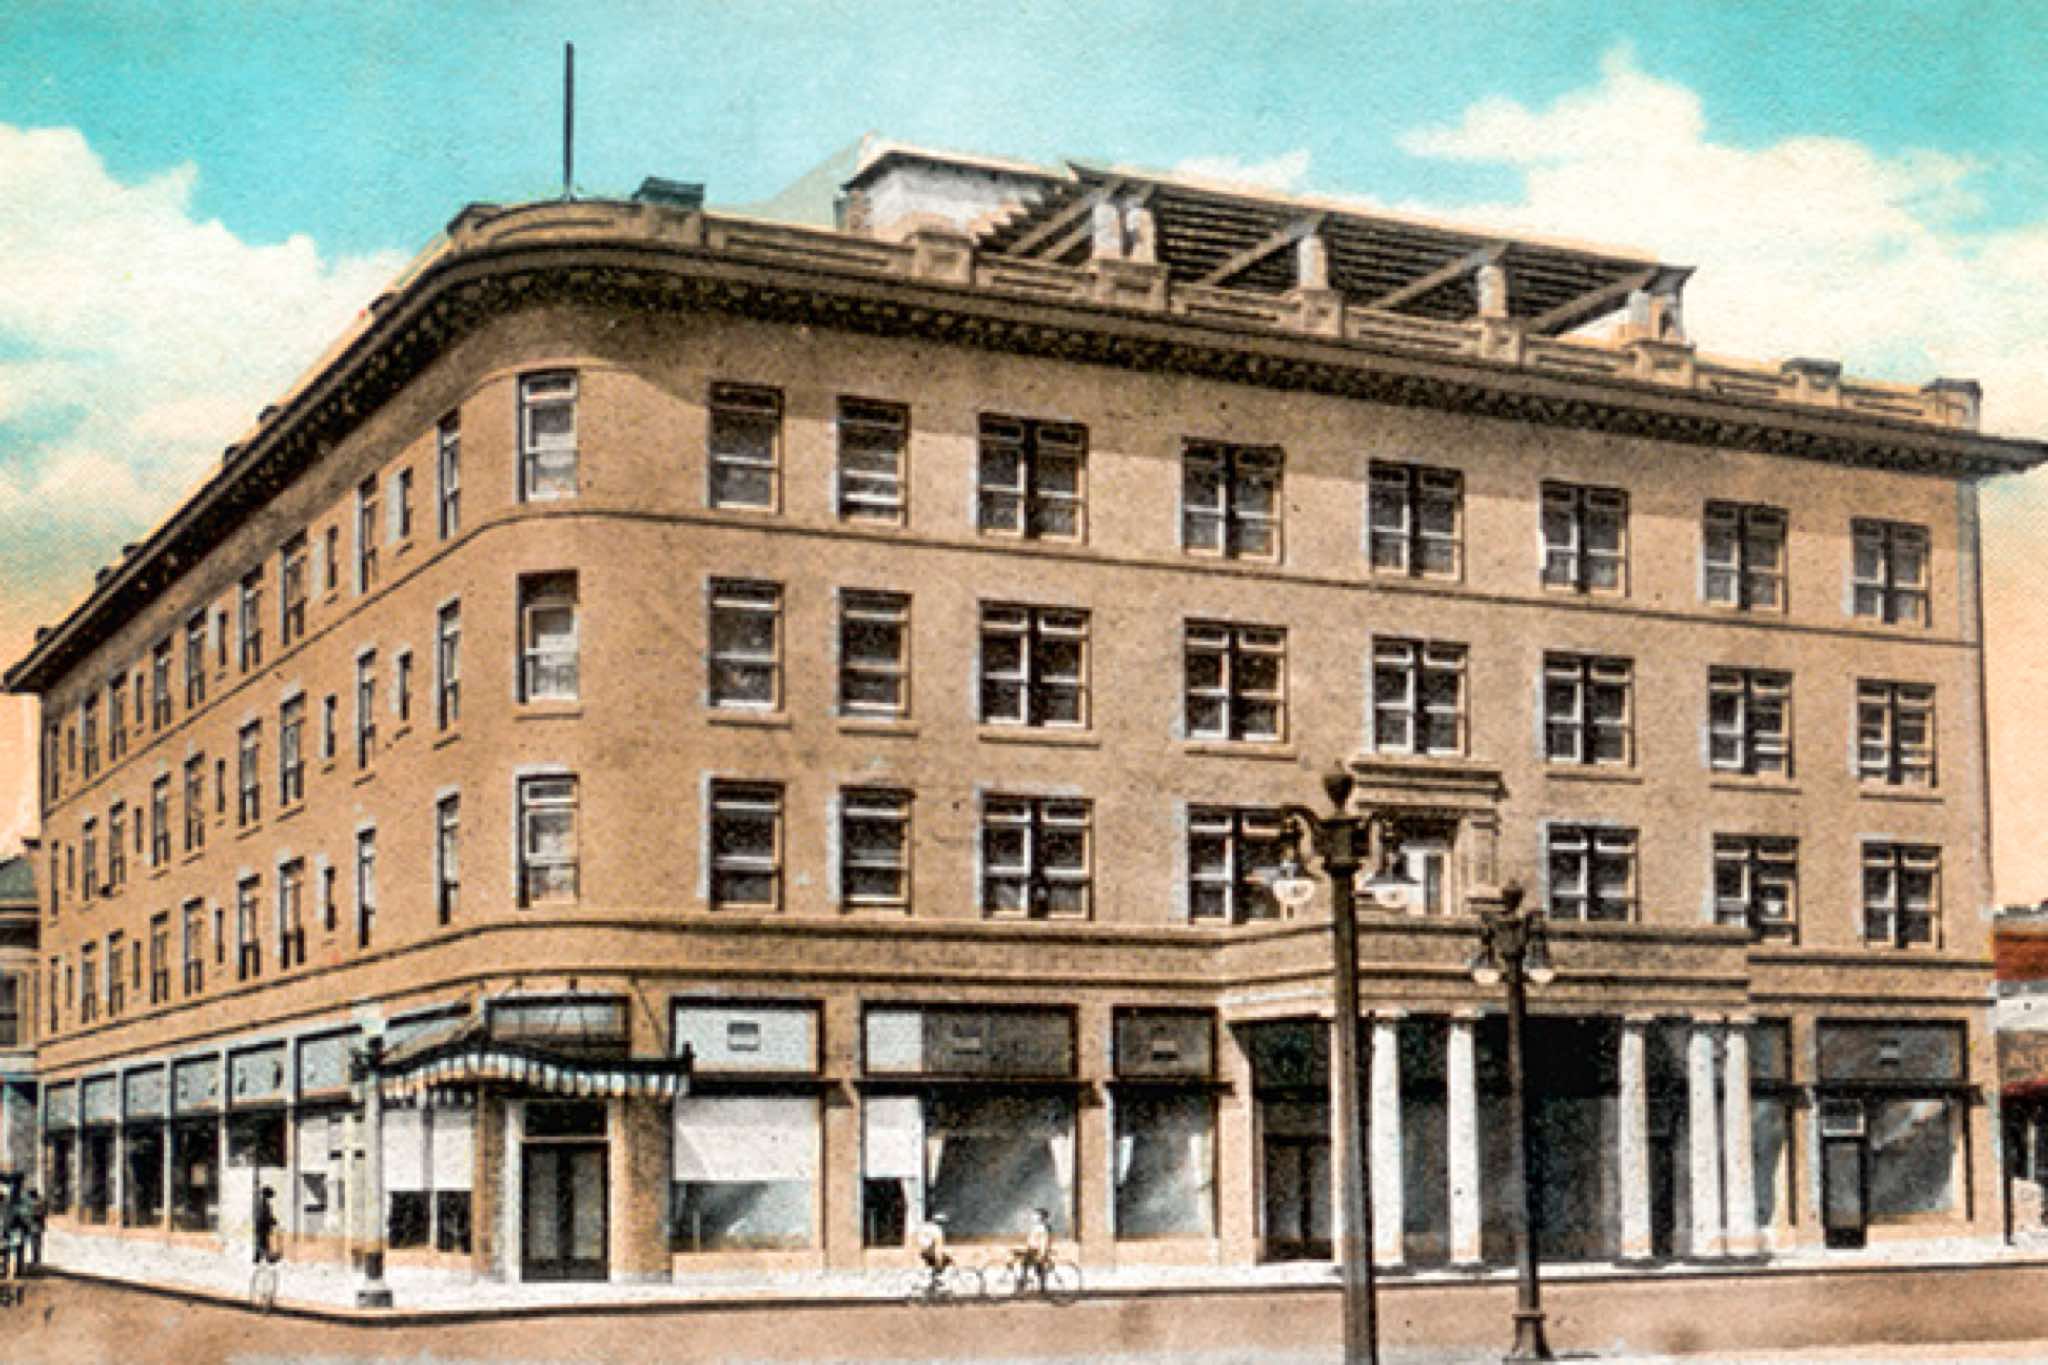 Hotel Modesto after opening in 1914.